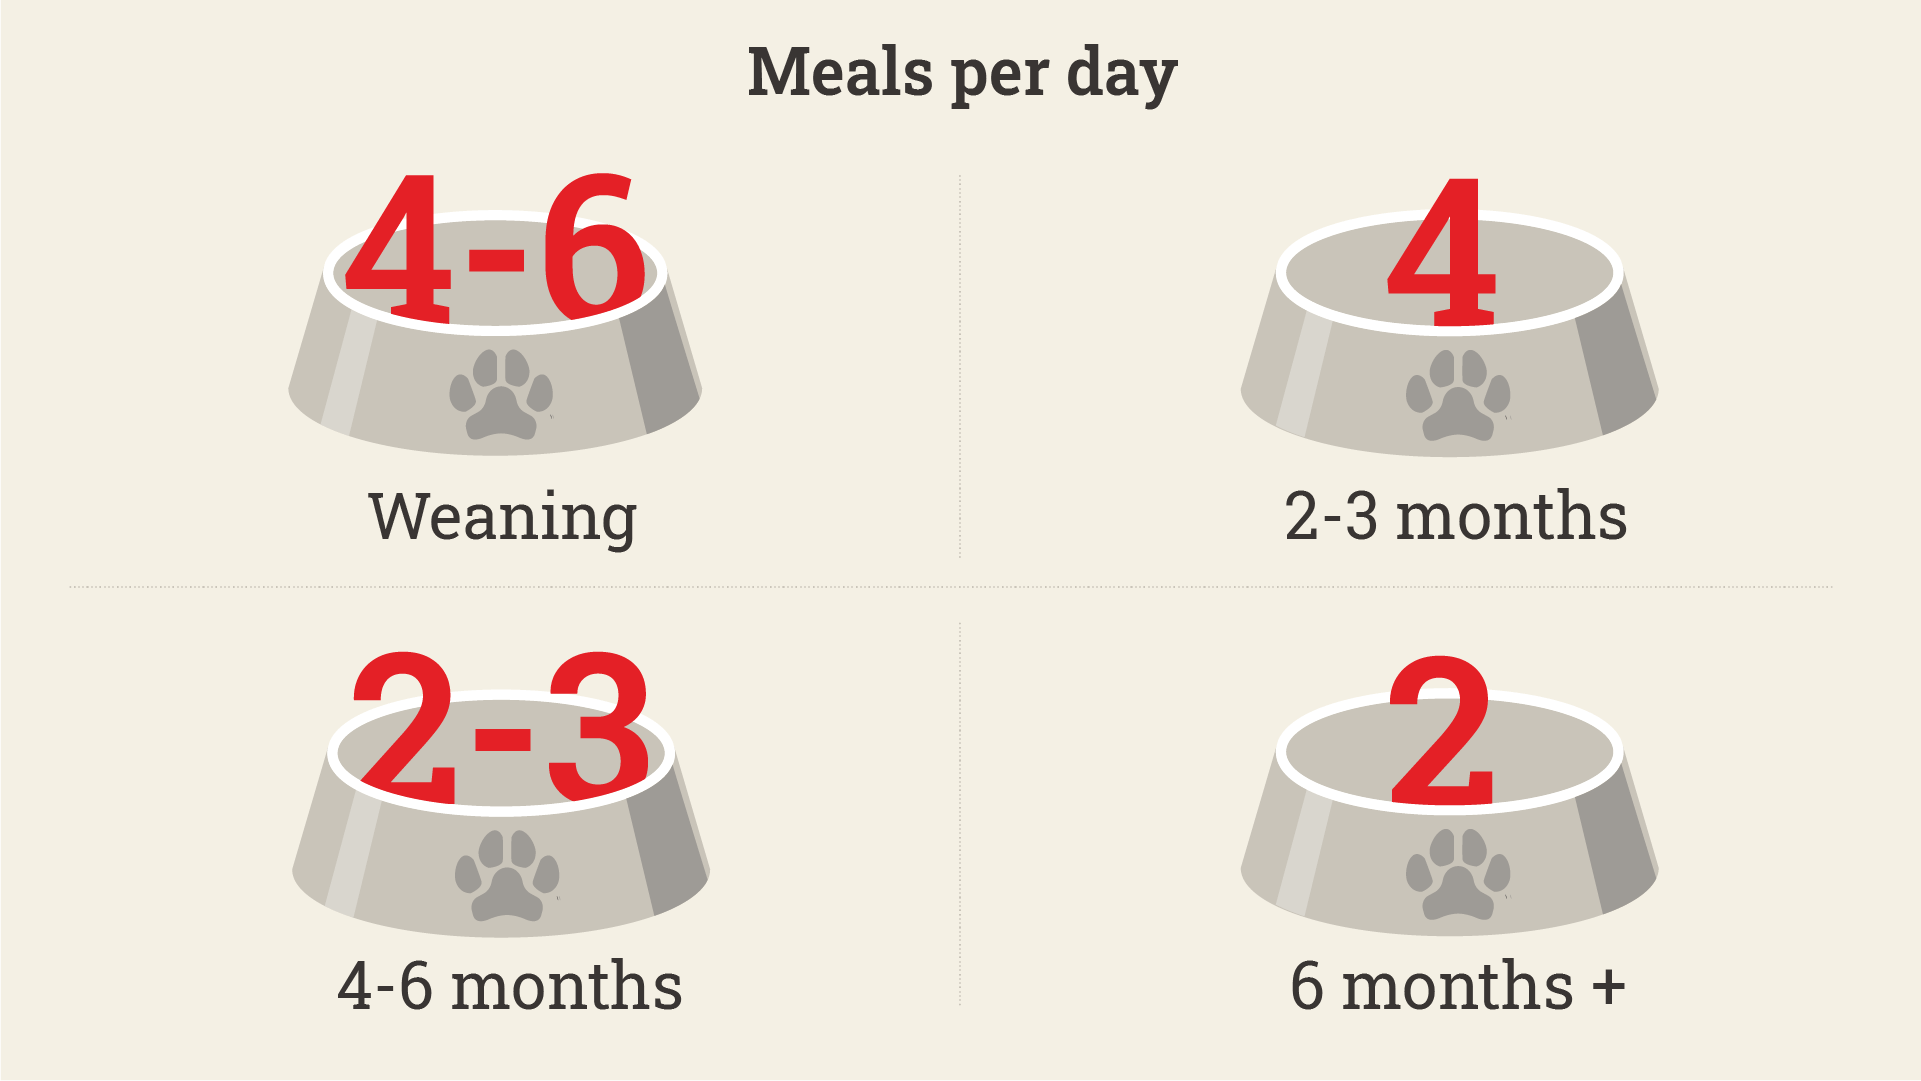 how often should i feed my 3 month old puppy